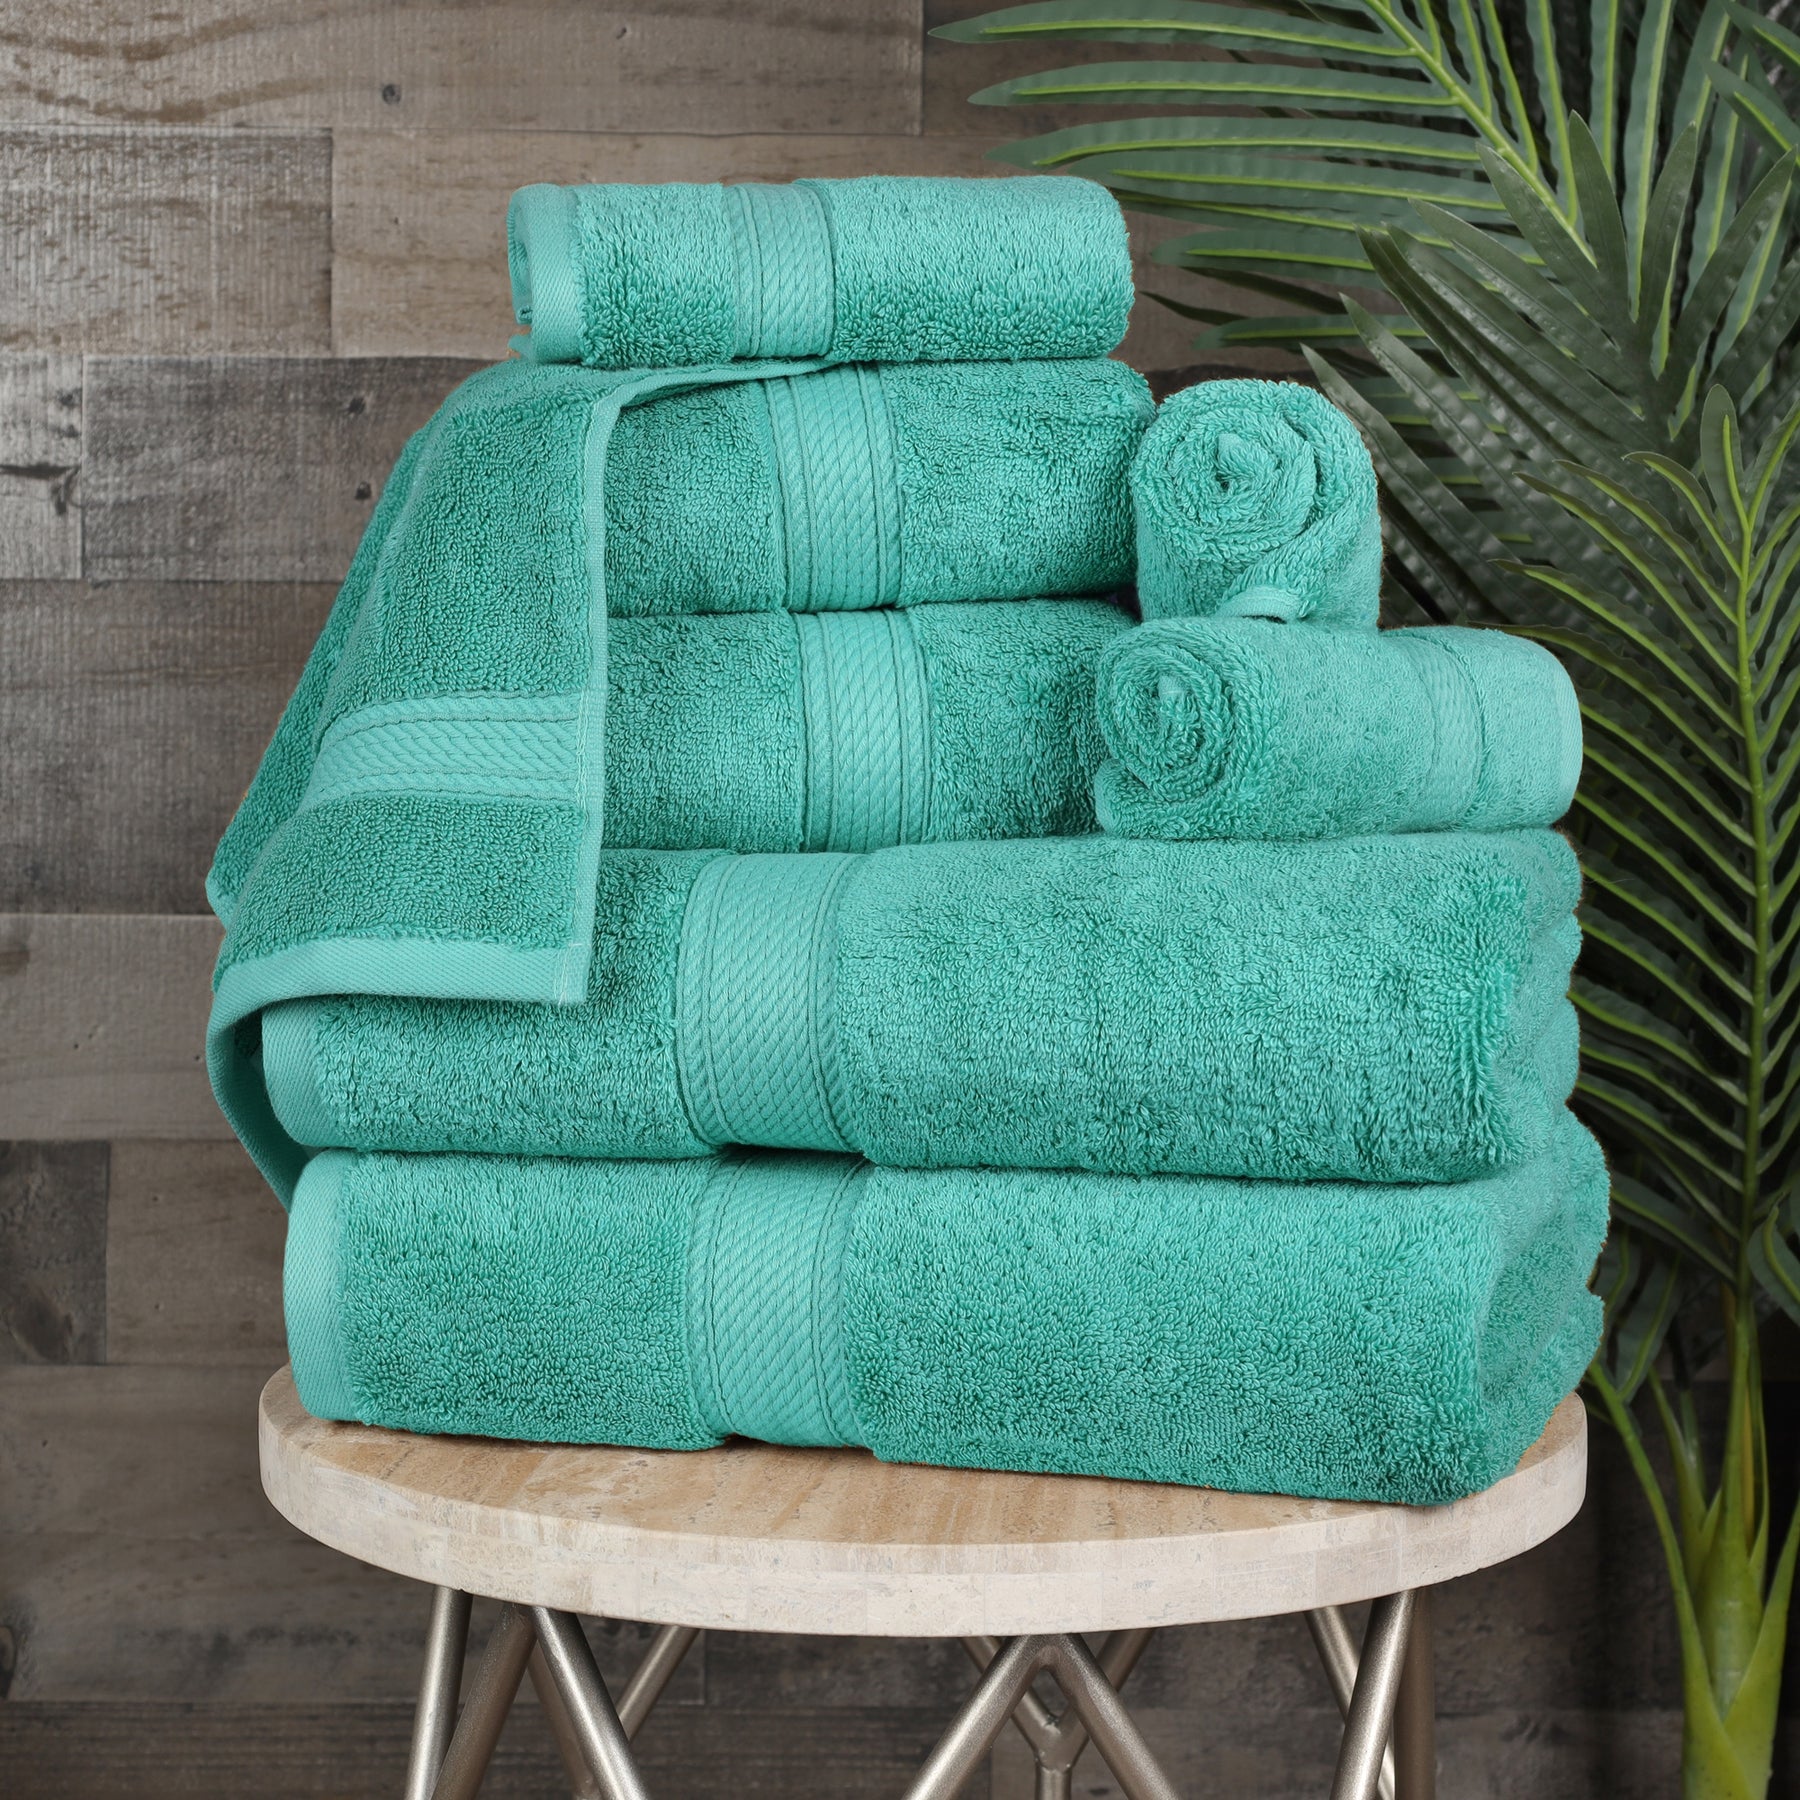 Purely Indulgent Egyptian Cotton Bath Towel 30 in x 58 in Hedge Green